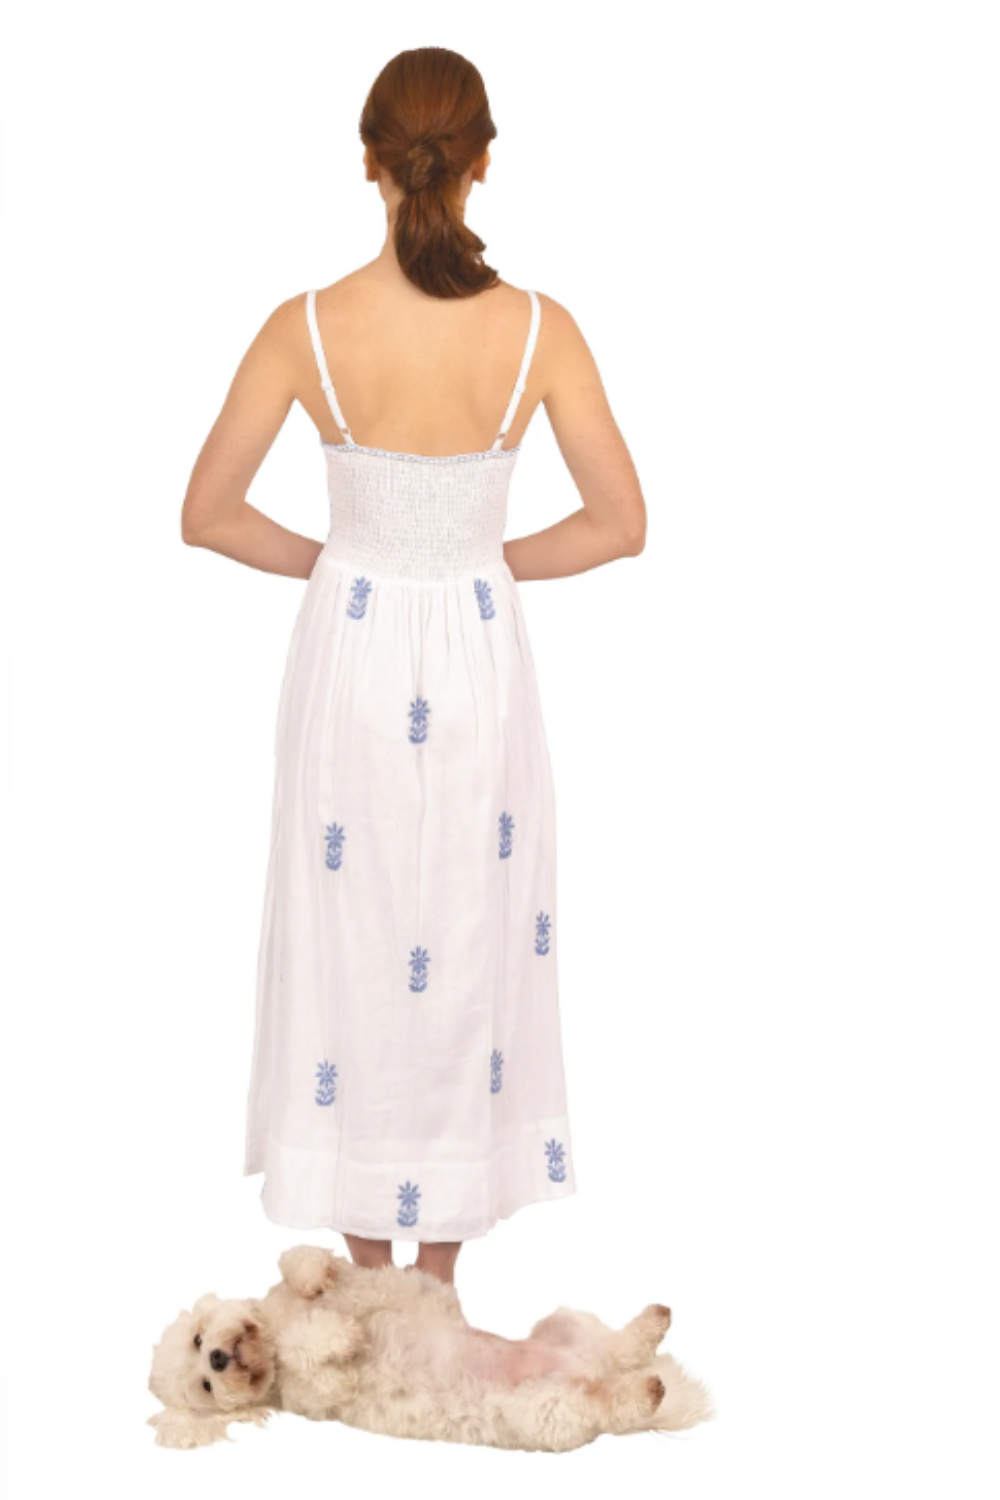 Gretchen Scott Fiesta Time Maxi Dress Hand Embroidered- White & Periwinkle